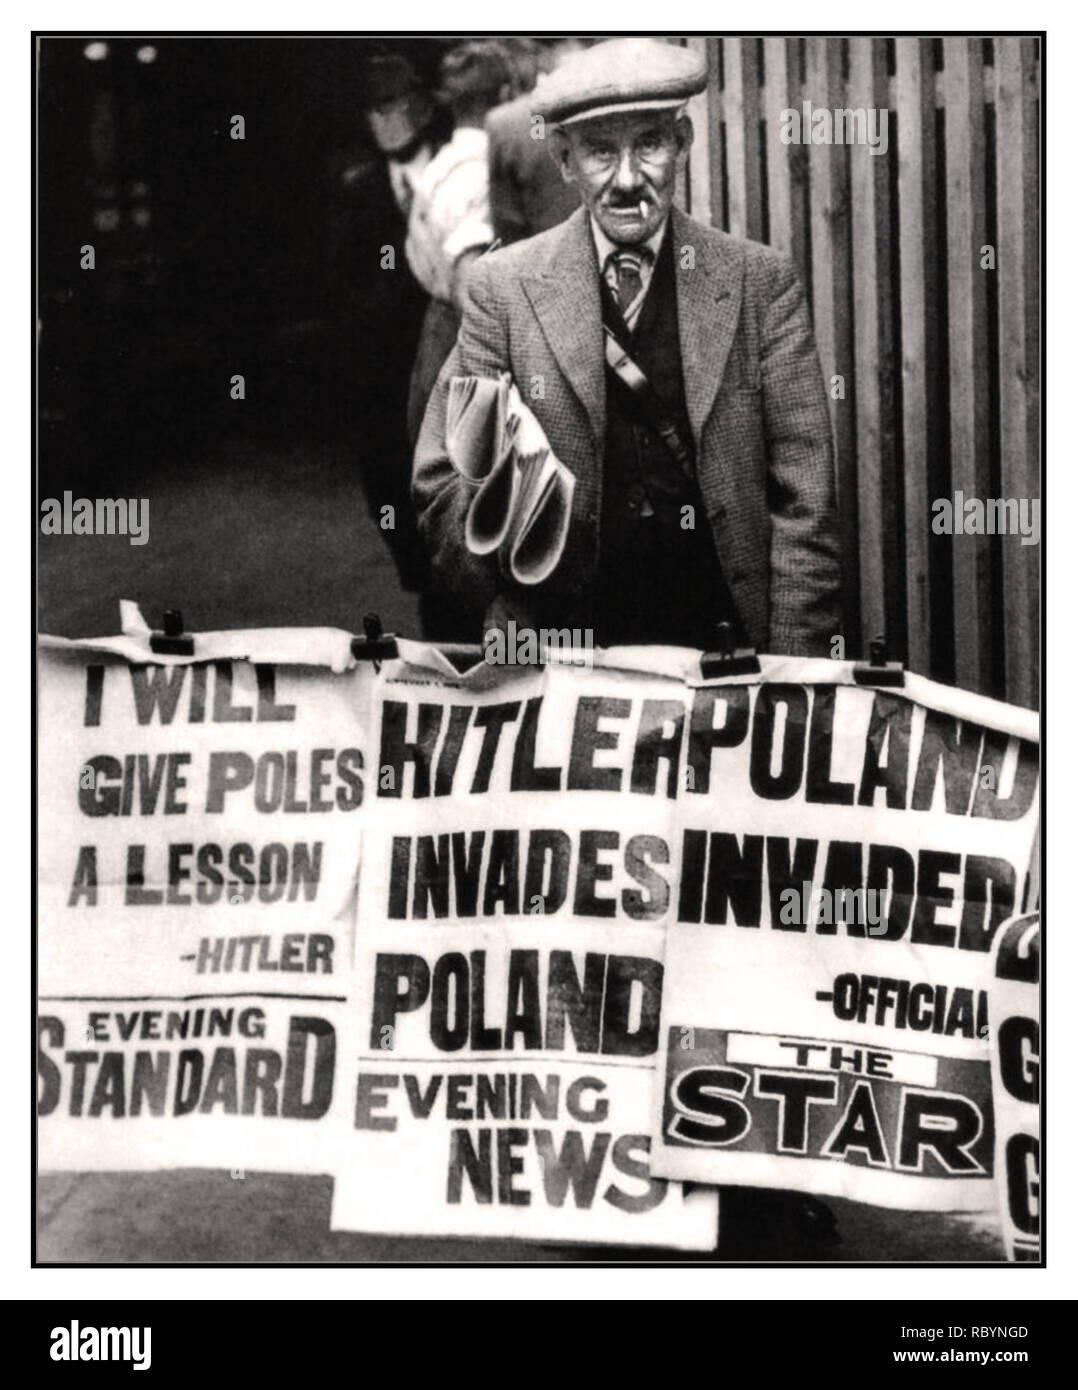 HITLER POLAND INVASION VINTAGE NEWSPAPER VENDOR  SEPTEMBER 1939 UK NEWSPAPERS HITLER INVADES POLAND  British newspaper seller and posters with news headlines that the Nazis have invaded and occupied Poland which started World War II.      Location: London, UK Date: September 1, 1939 Stock Photo